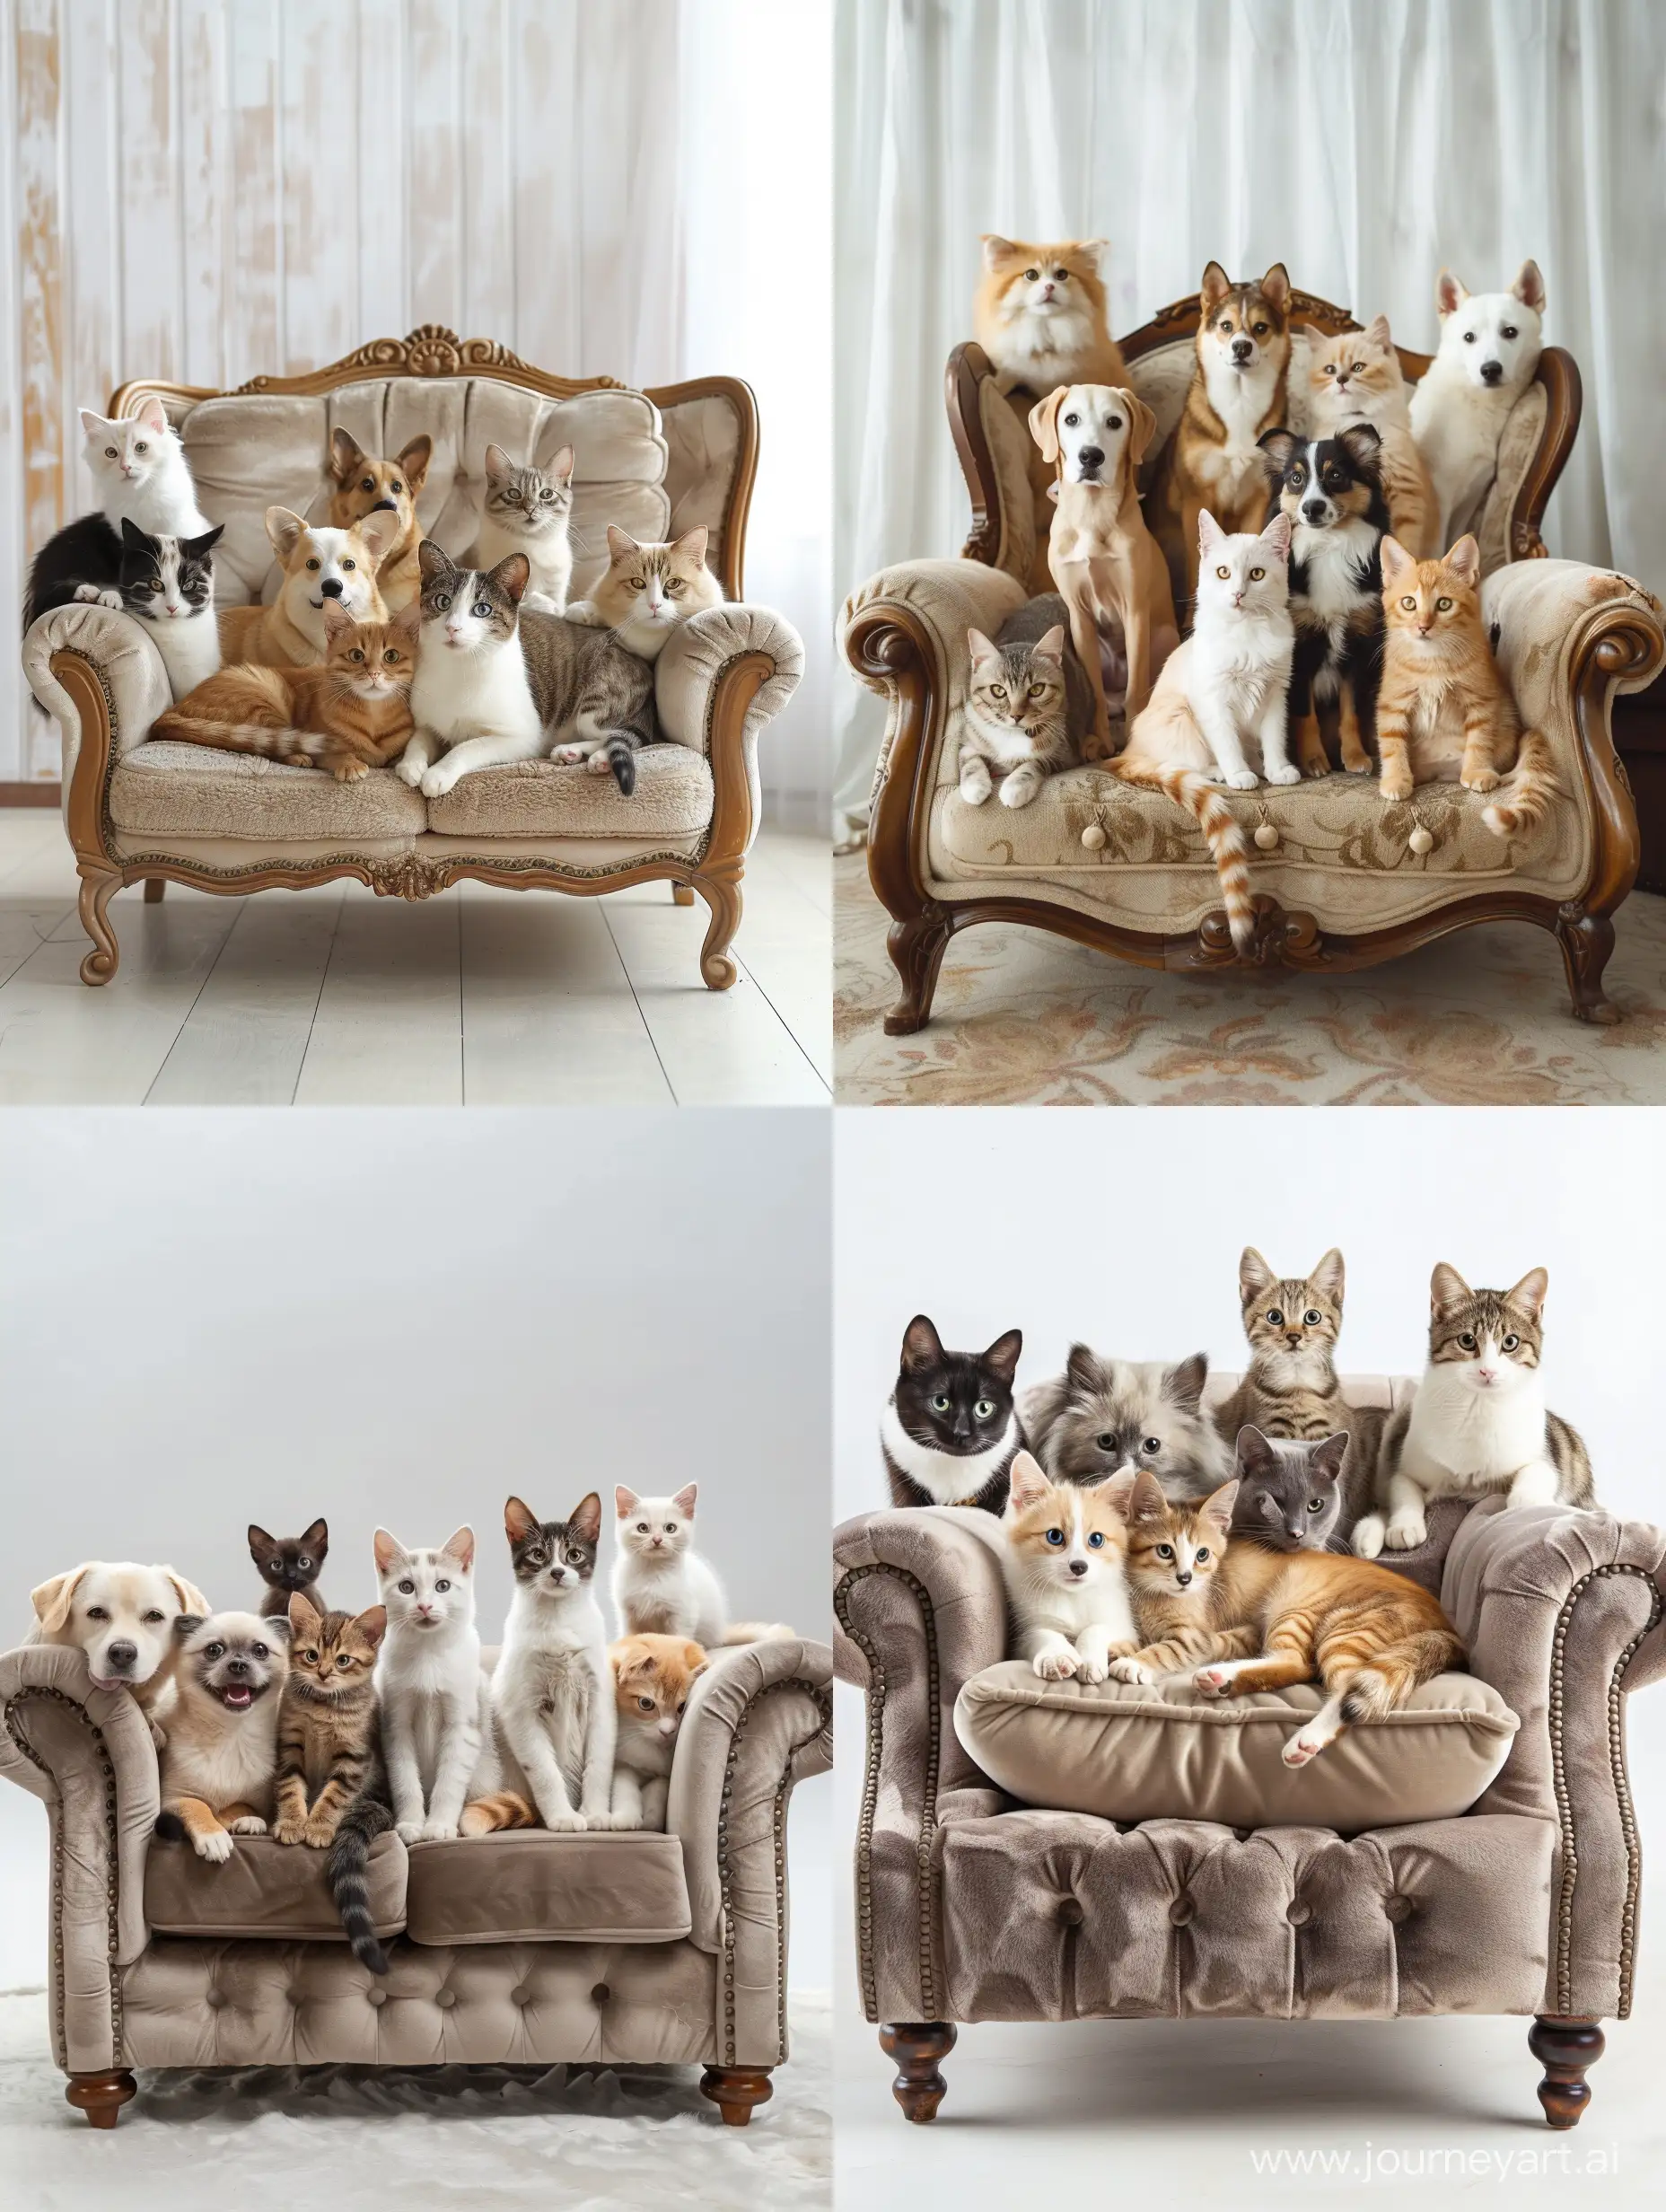 Adorable-Dogs-and-Cats-Relaxing-on-Cozy-Sofa-and-Armchair